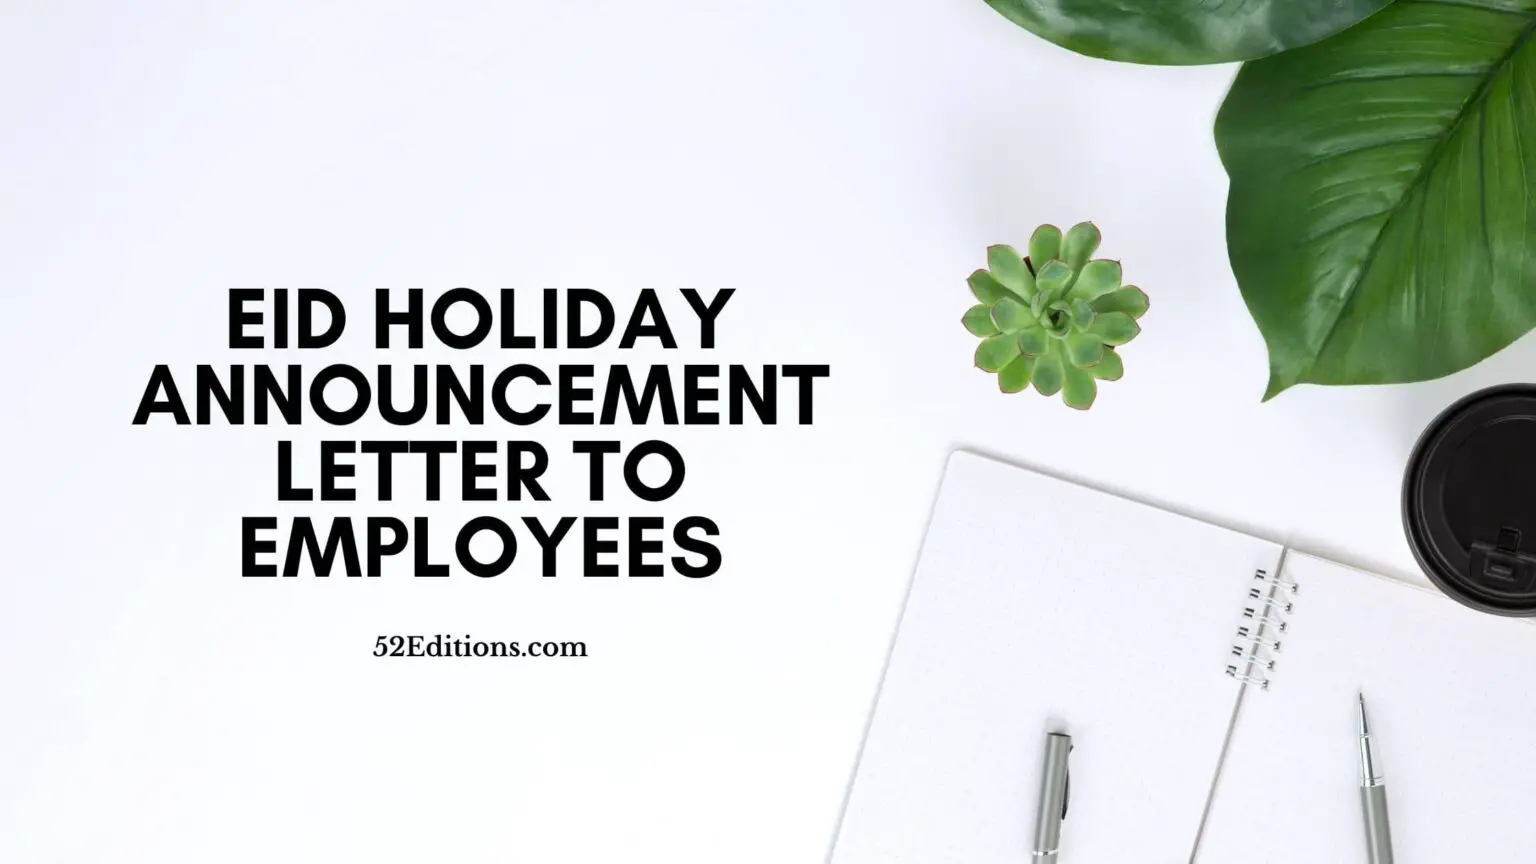 Eid Holiday Announcement Letter To Employees // Get FREE Letter